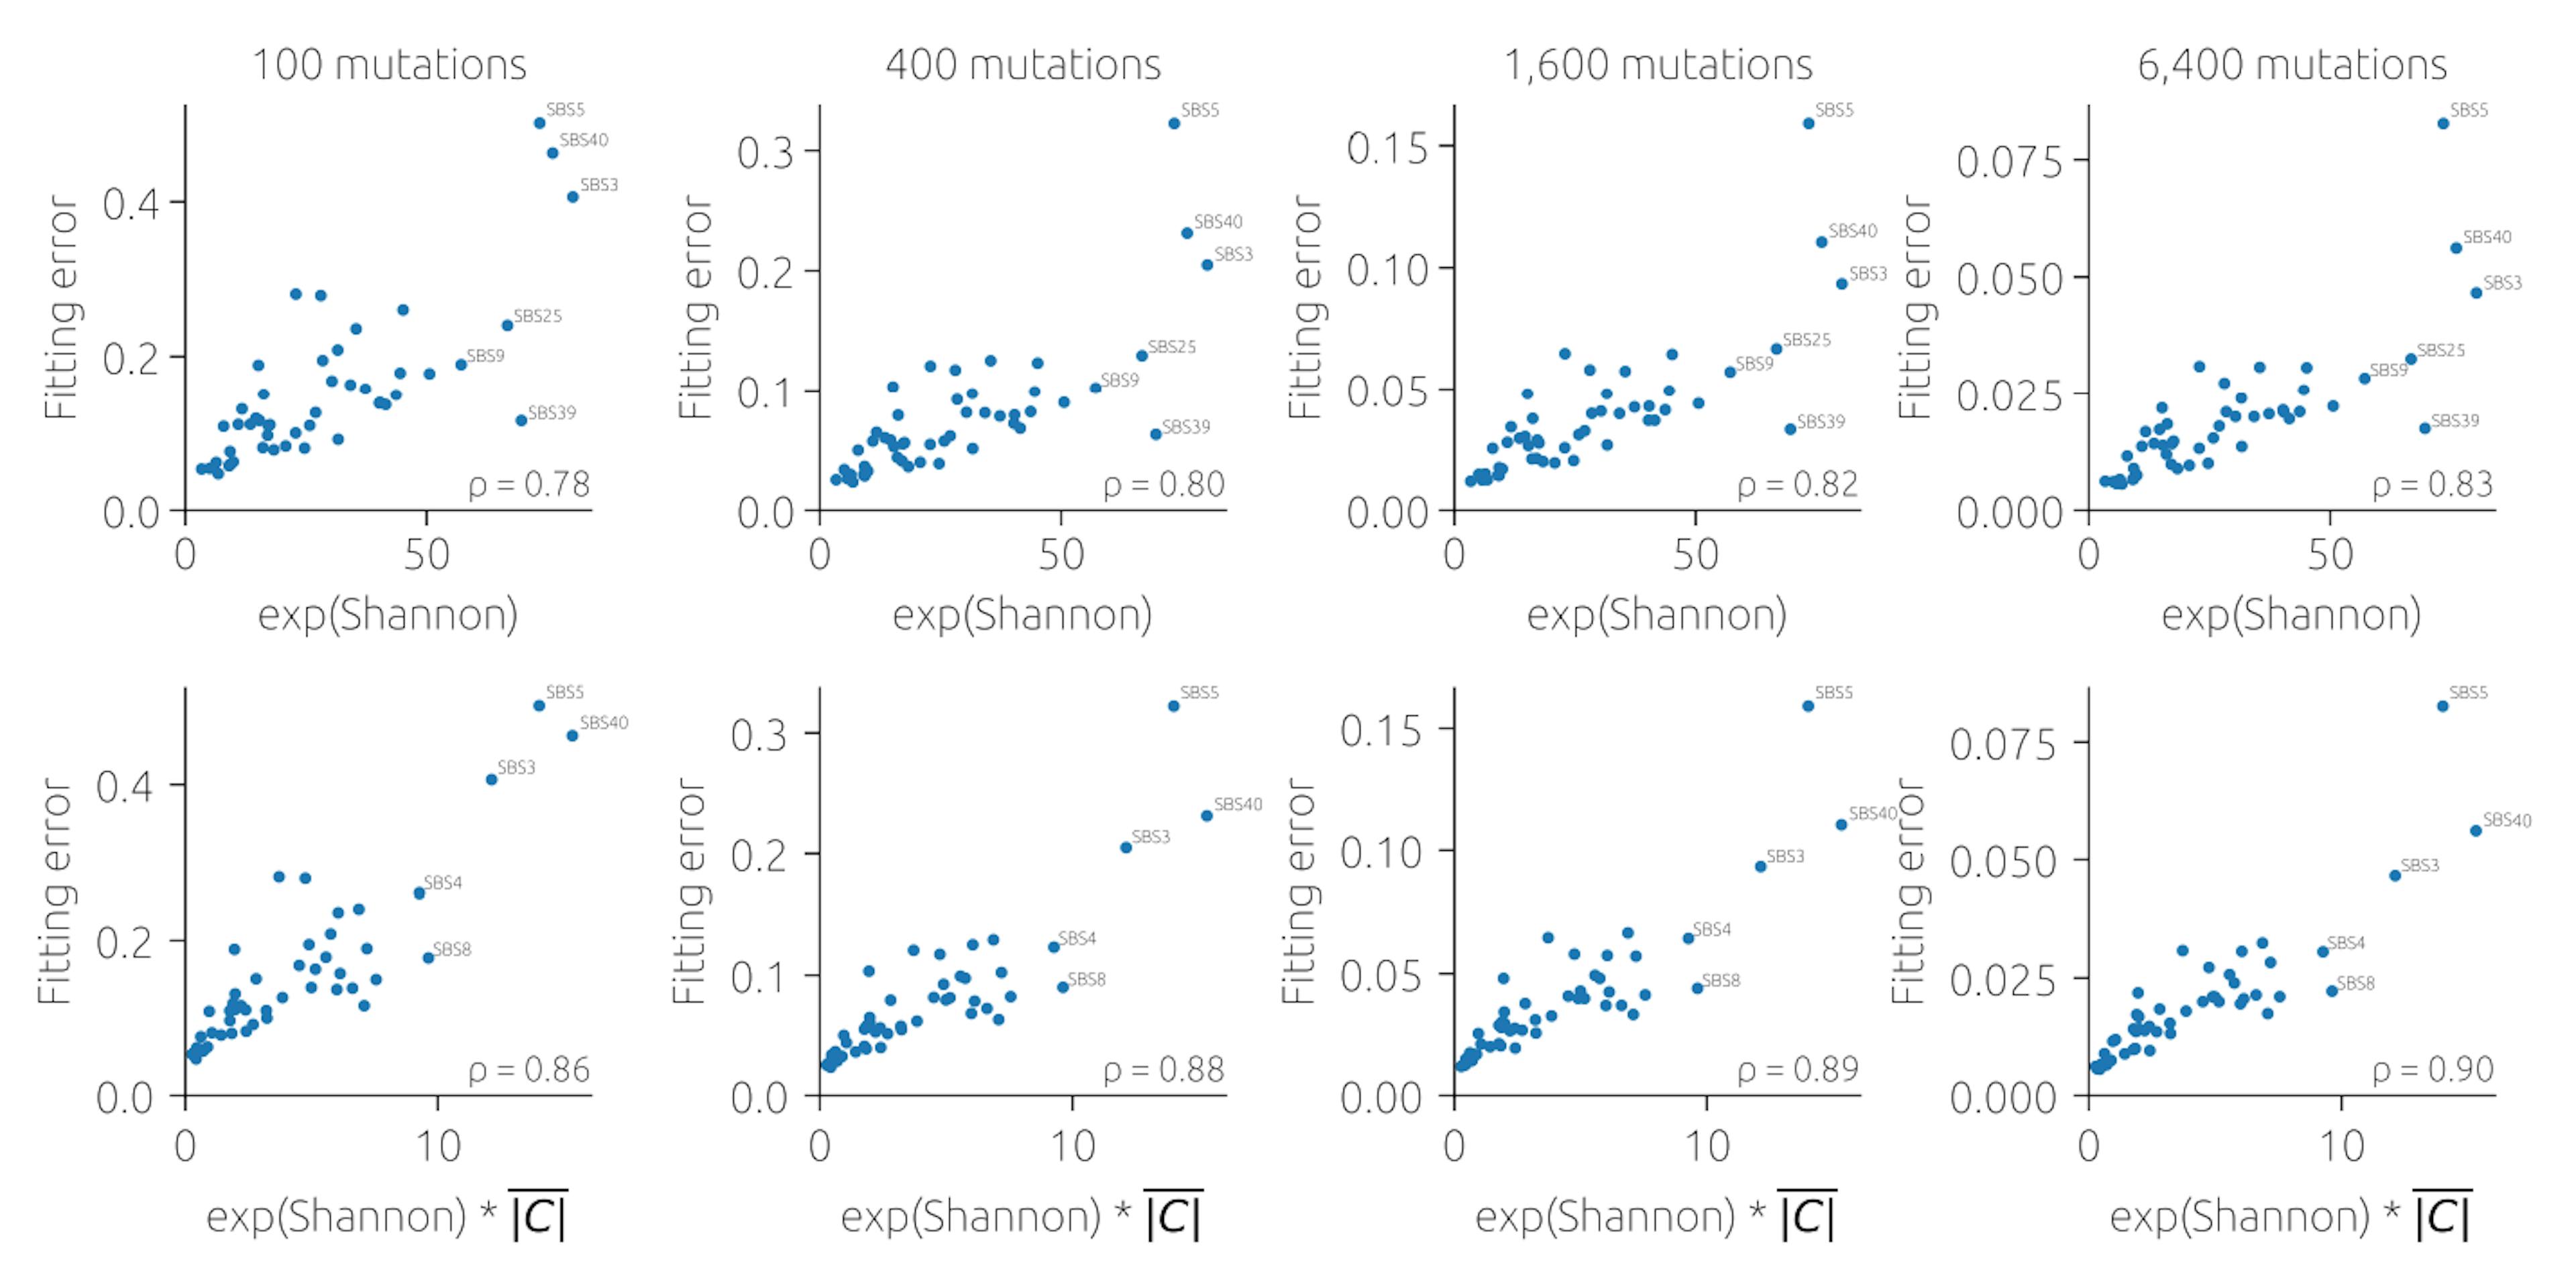 Supplementary Figure 1: Exponentiated Shannon entropy of signatures (top row) and exponentiated Shannon entropy multiplied with the signature’s mean absolute Pearson correlation with all other signatures (bottom row) versus the average fitting error achieved by the evaluated tools (as in SF2, we exclude YAPSA, sigminer QP, and sigminer SA that produce the same results as MutationalPatterns). We see that the exponentiated Shannon entropy (which measures an effective number of active contexts for a signature) is closely related with the fitting error and the agreement improves with the number of mutations per sample. The agreement further improves when the average correlation with other signatures is taken into account. In summary, flat signatures that are on average similar to other signatures are the most difficult to fit.